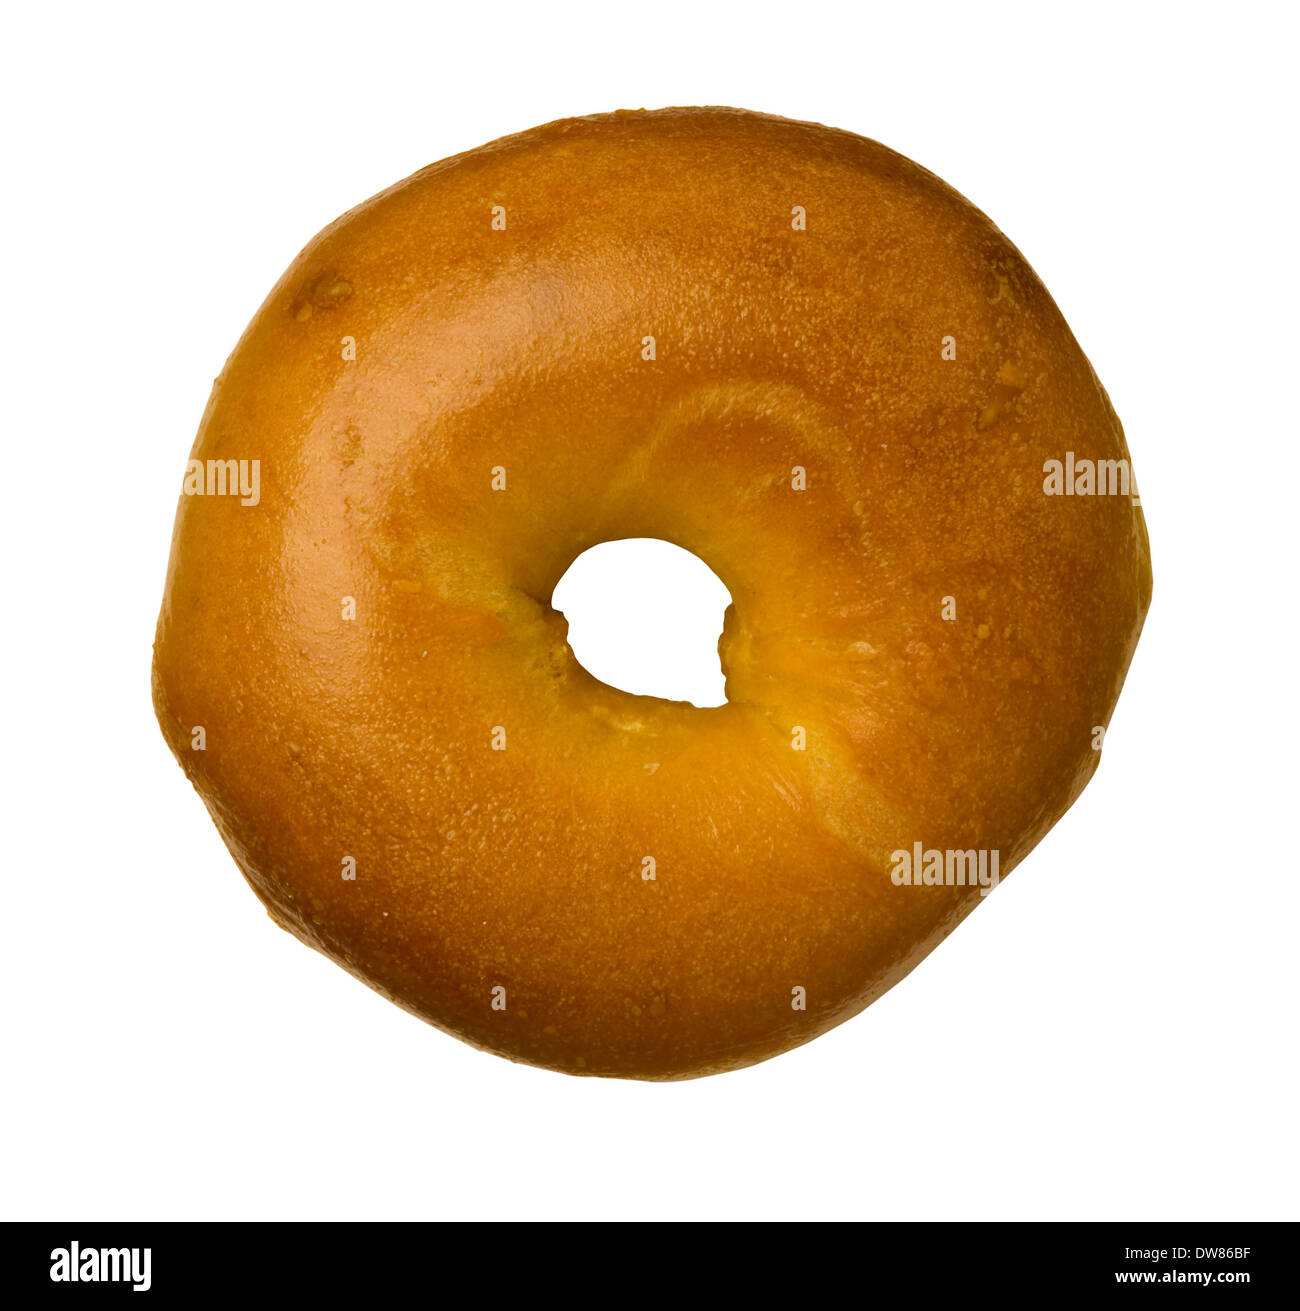 Egg bagel isolated against a white background Stock Photo